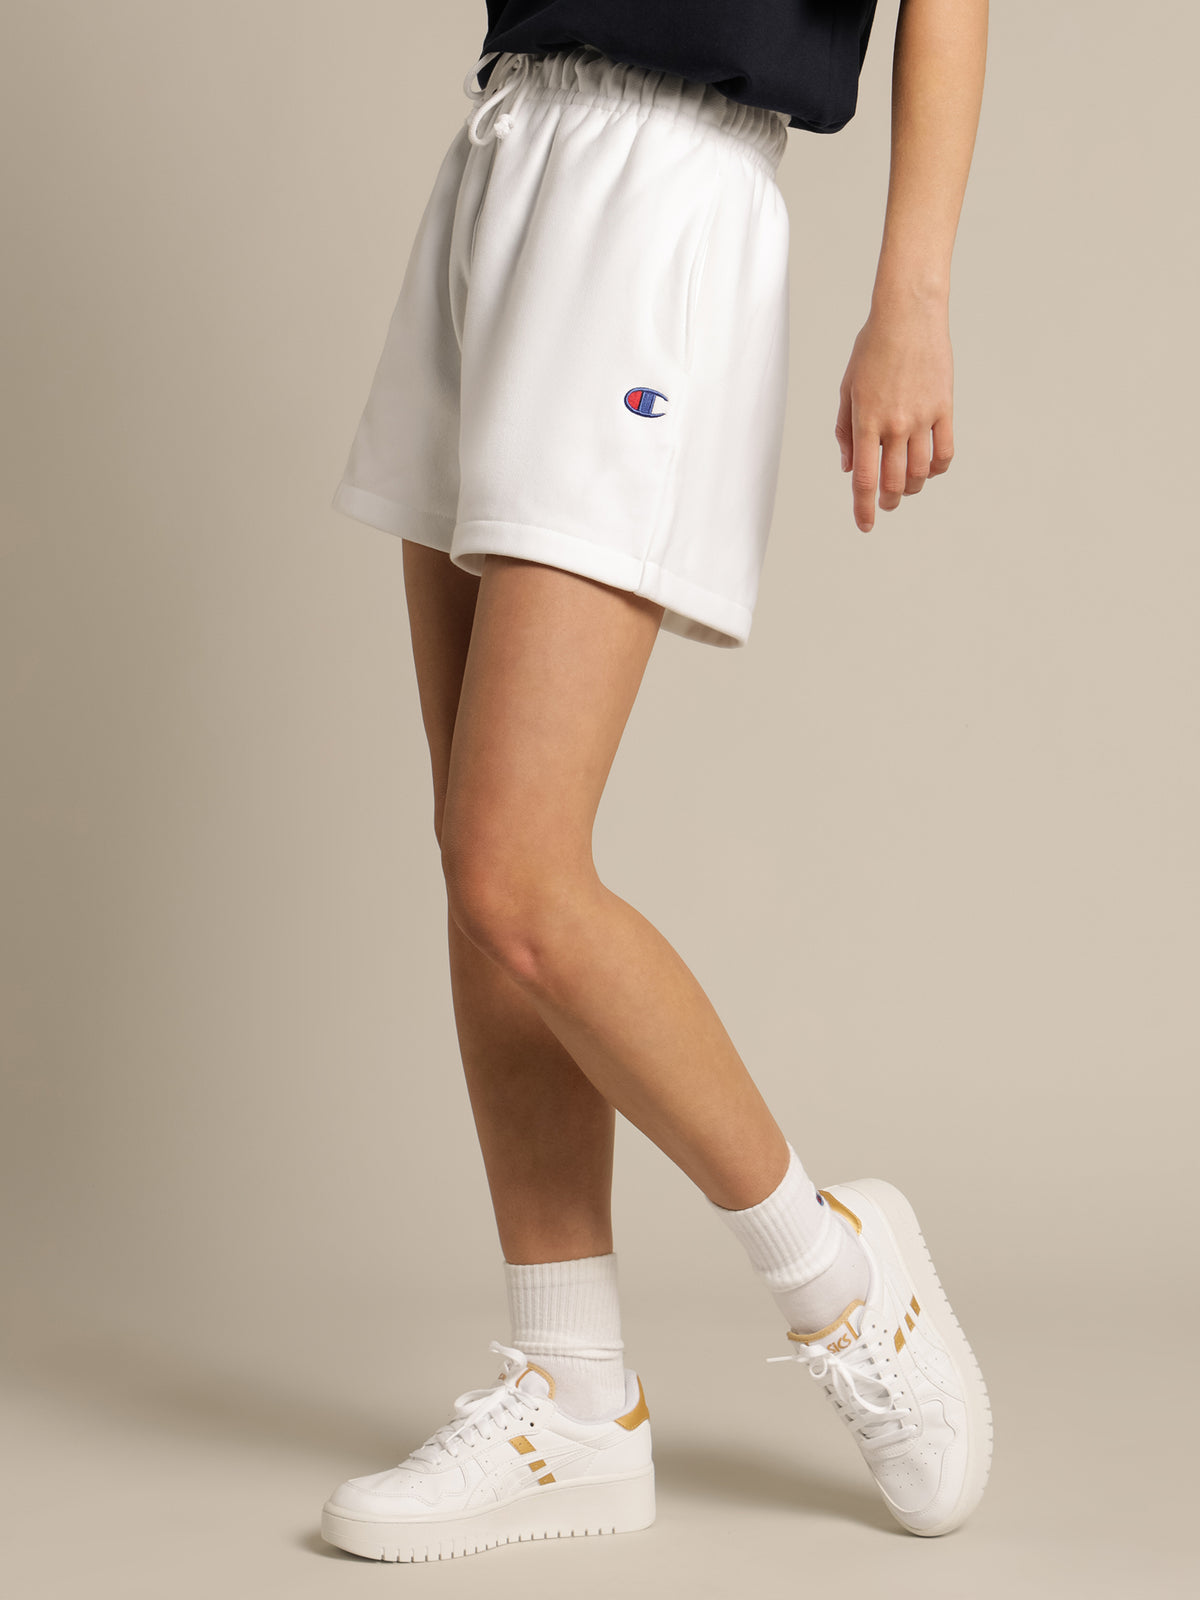 Reverse Weave Shorts in White